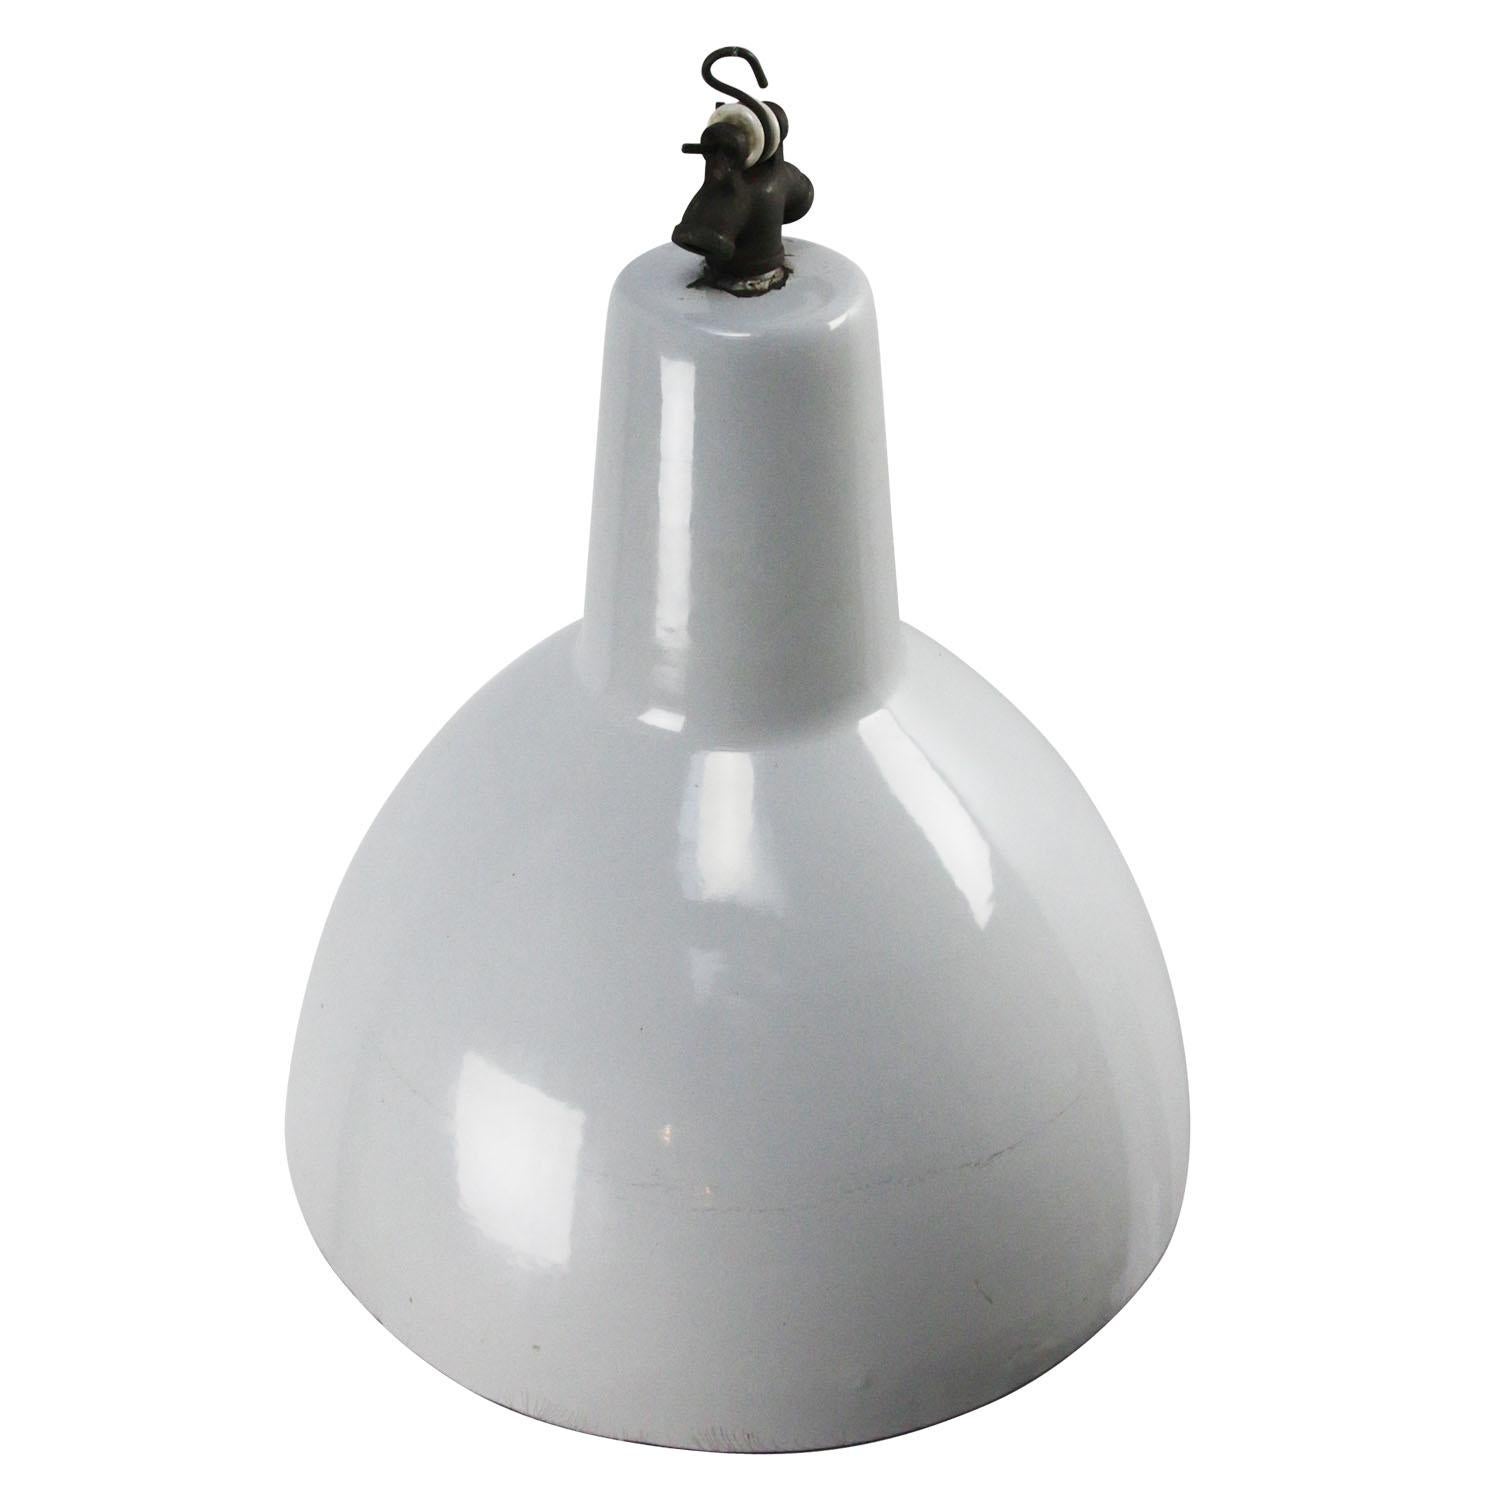 Dutch grey industrial factory light by Philips
Thick quality Enamel.
Used in warehouses and factories. 

E27/E26

Weight: 2.20 kg / 4.9 lb

Priced per individual item. All lamps have been made suitable by international standards for